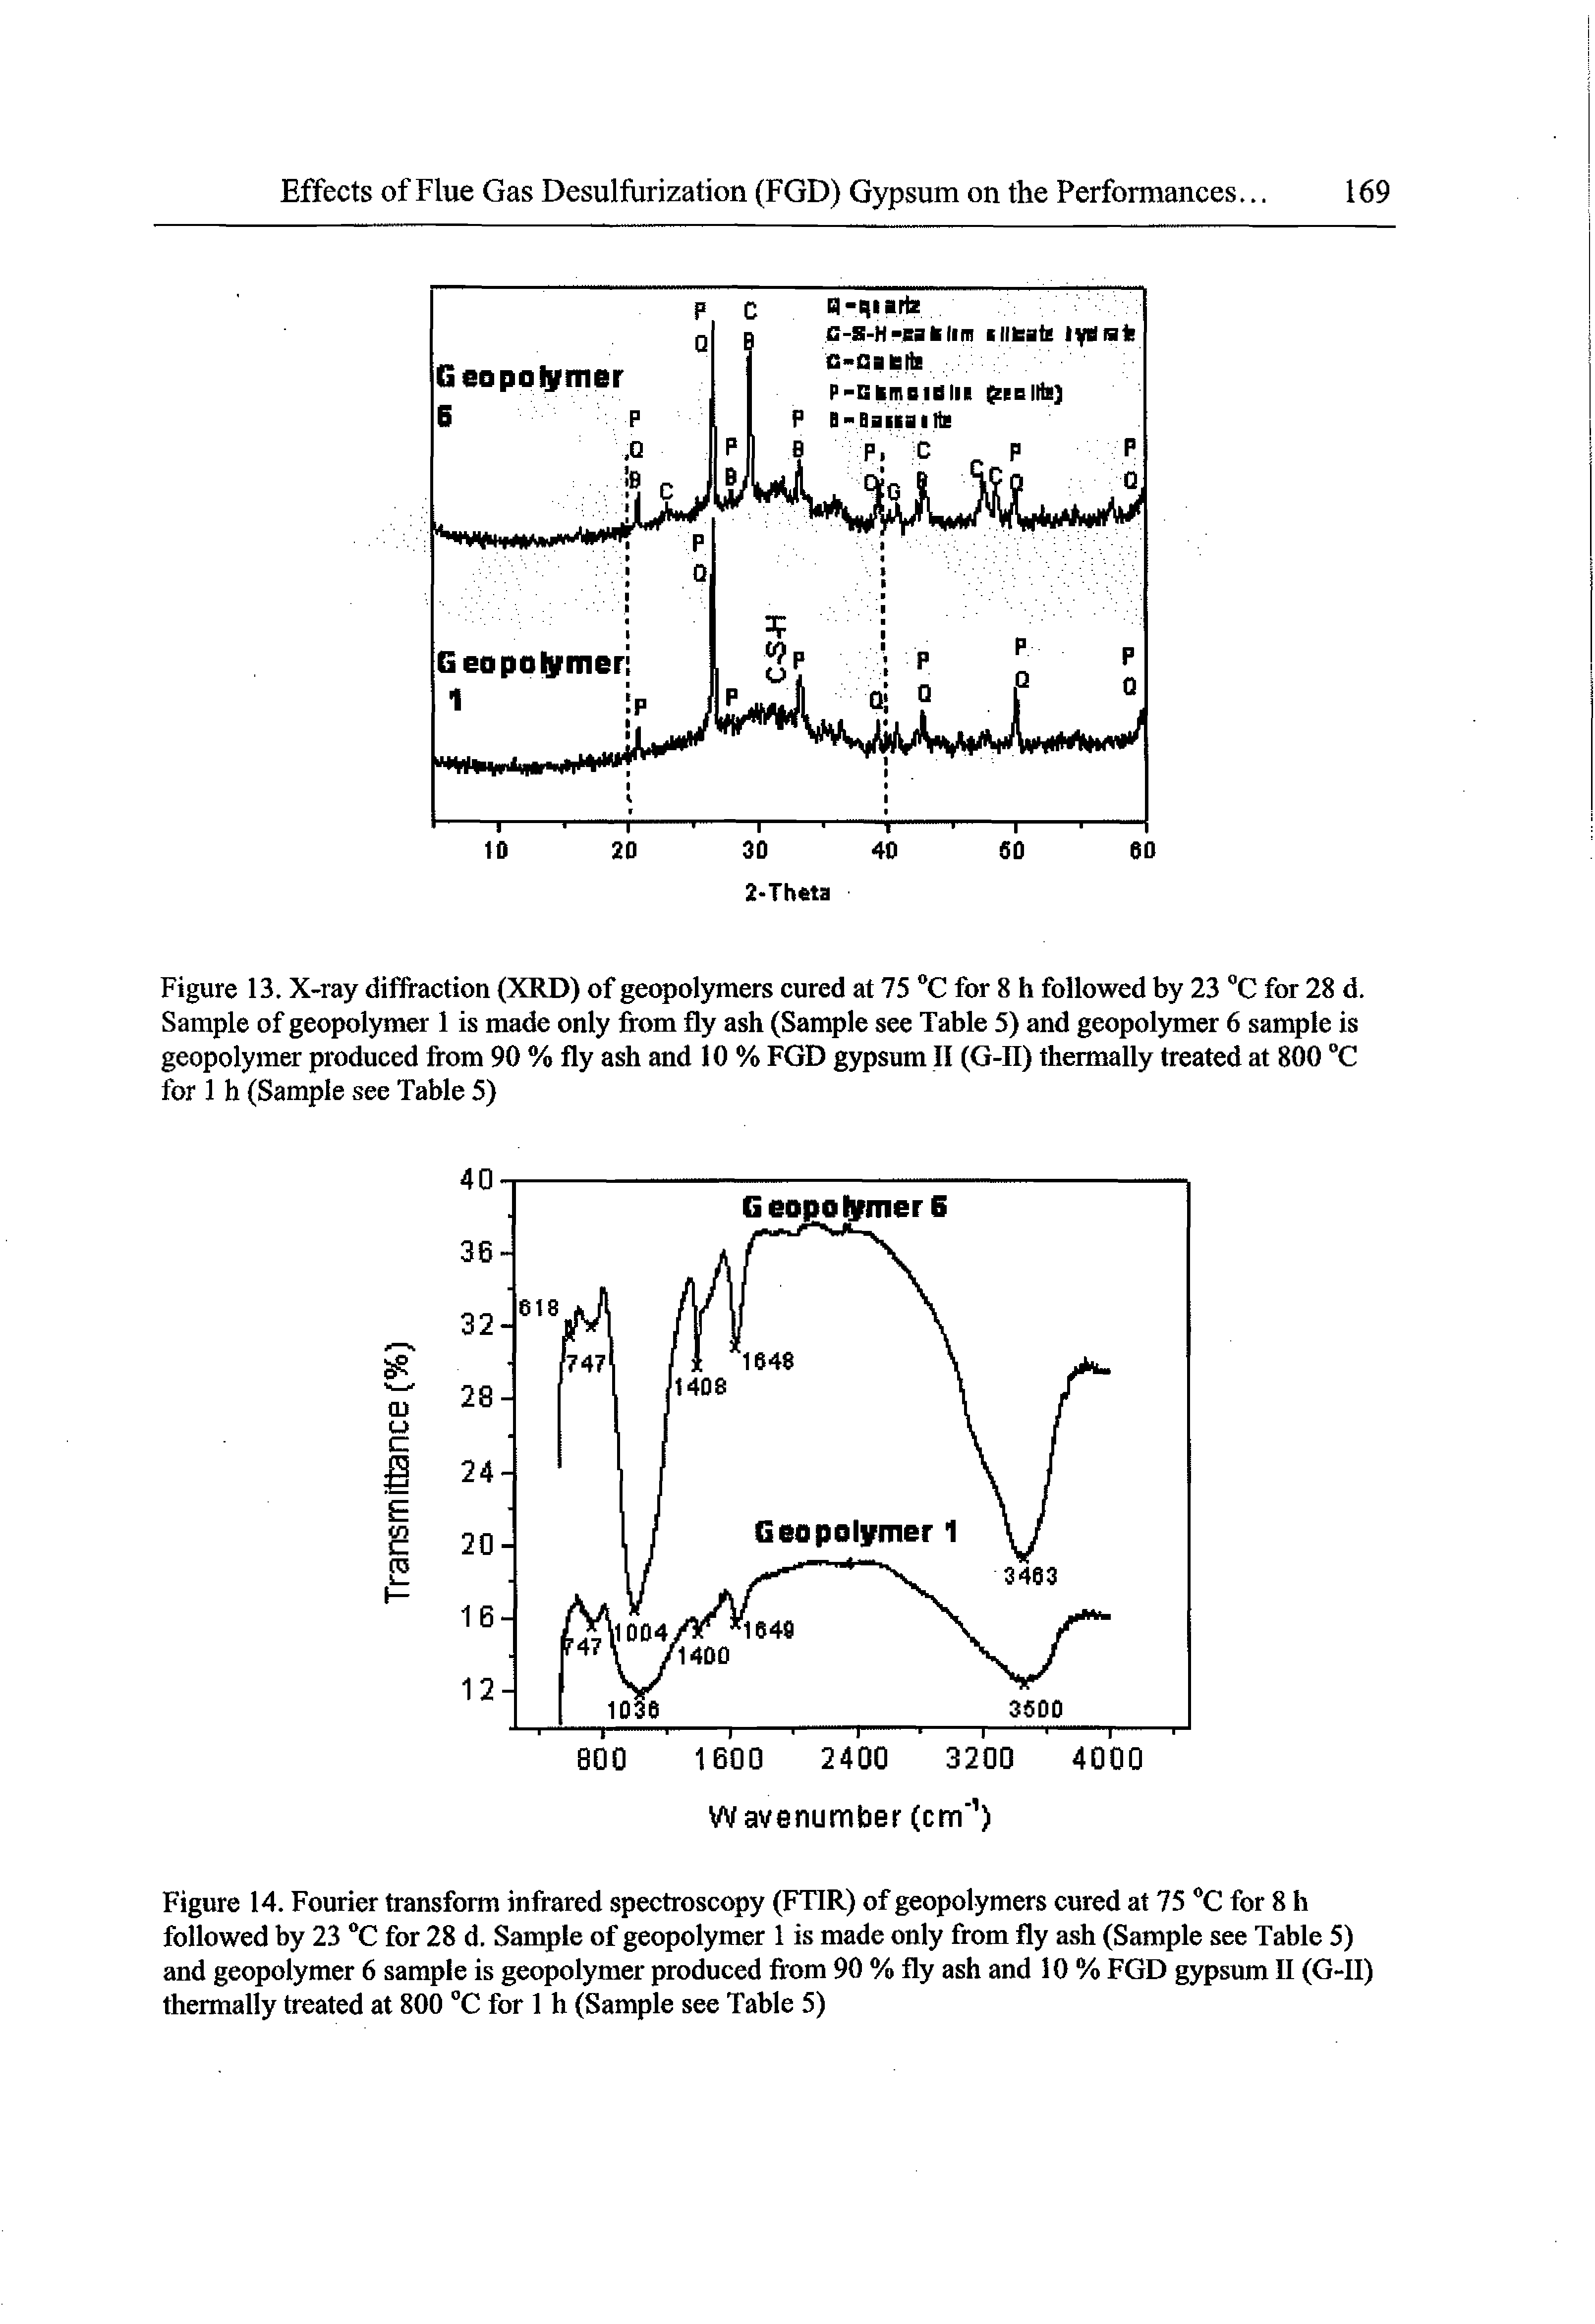 Figure 14. Fourier transform infrared spectroscopy (FTIR) of geopolymers cured at 75 for 8 h followed by 23 C for 28 d. Sample of geopolymer 1 is made only from fly ash (Sample see Table 5) and geopolymer 6 sample is geopolymer produced fr om 90 % fly ash and 10 % FGD gypsum II (G-II) thermally treated at 800 "C for 1 h (Sample see Table 5)...